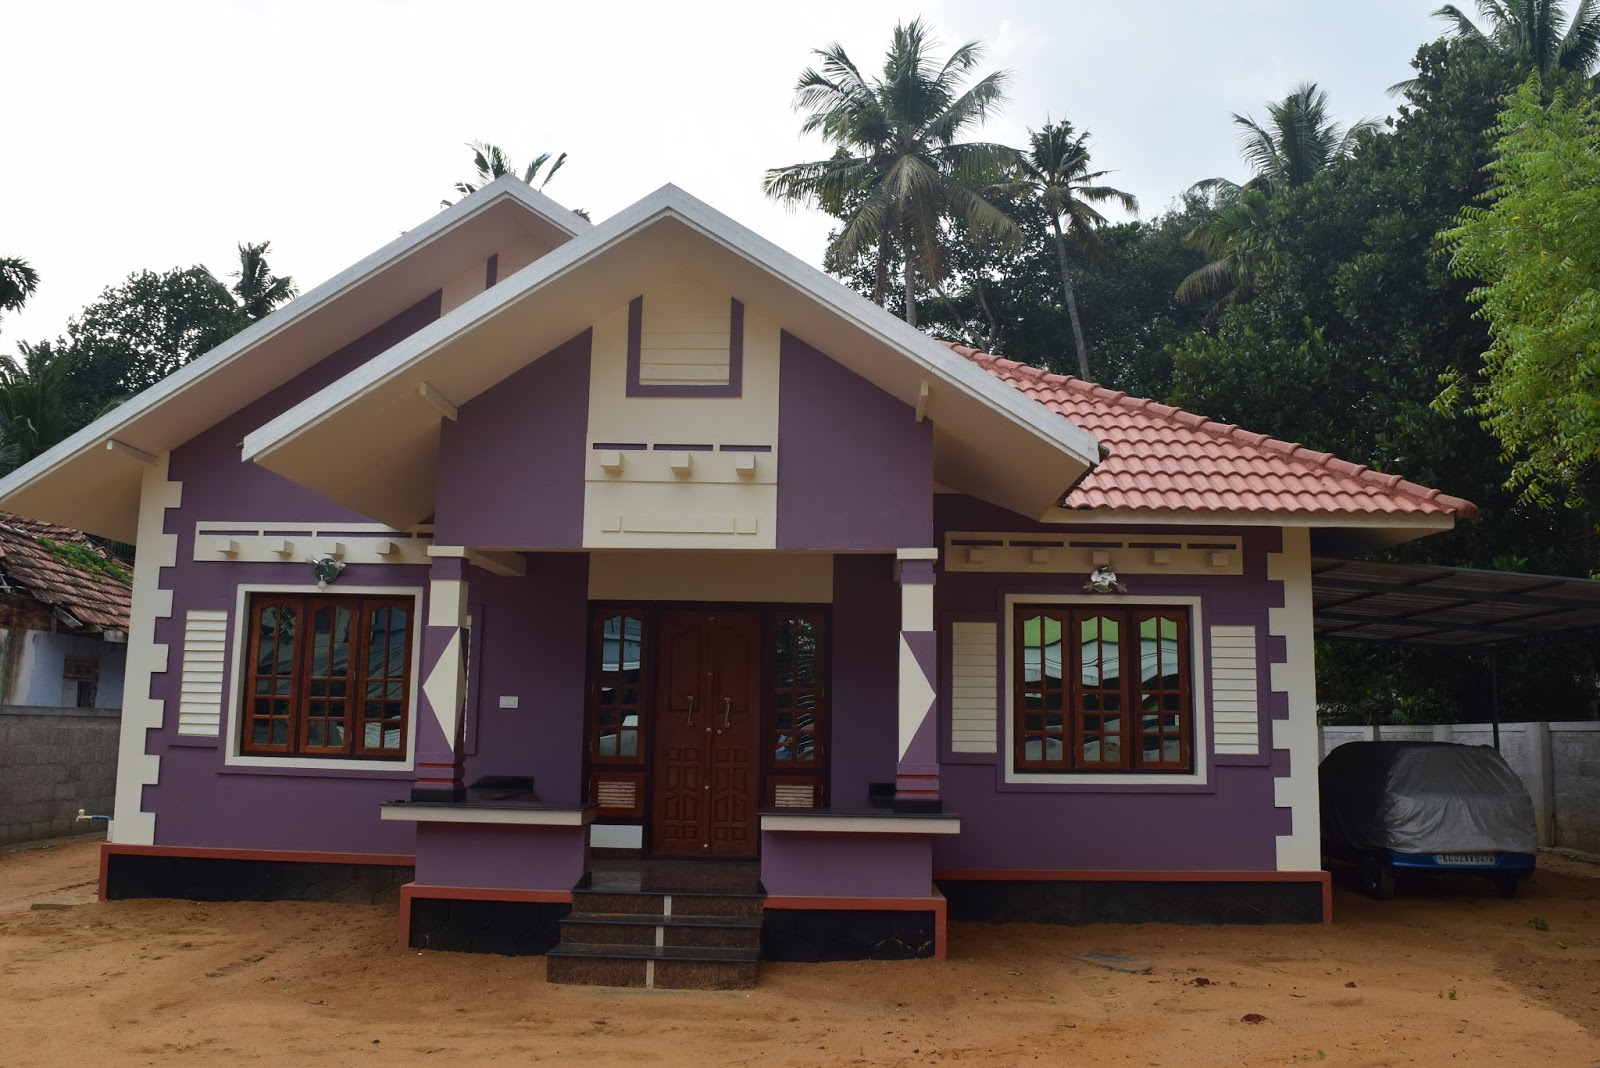 Low cost  House  Design  at Trivandram BUILDING DESIGNERS 